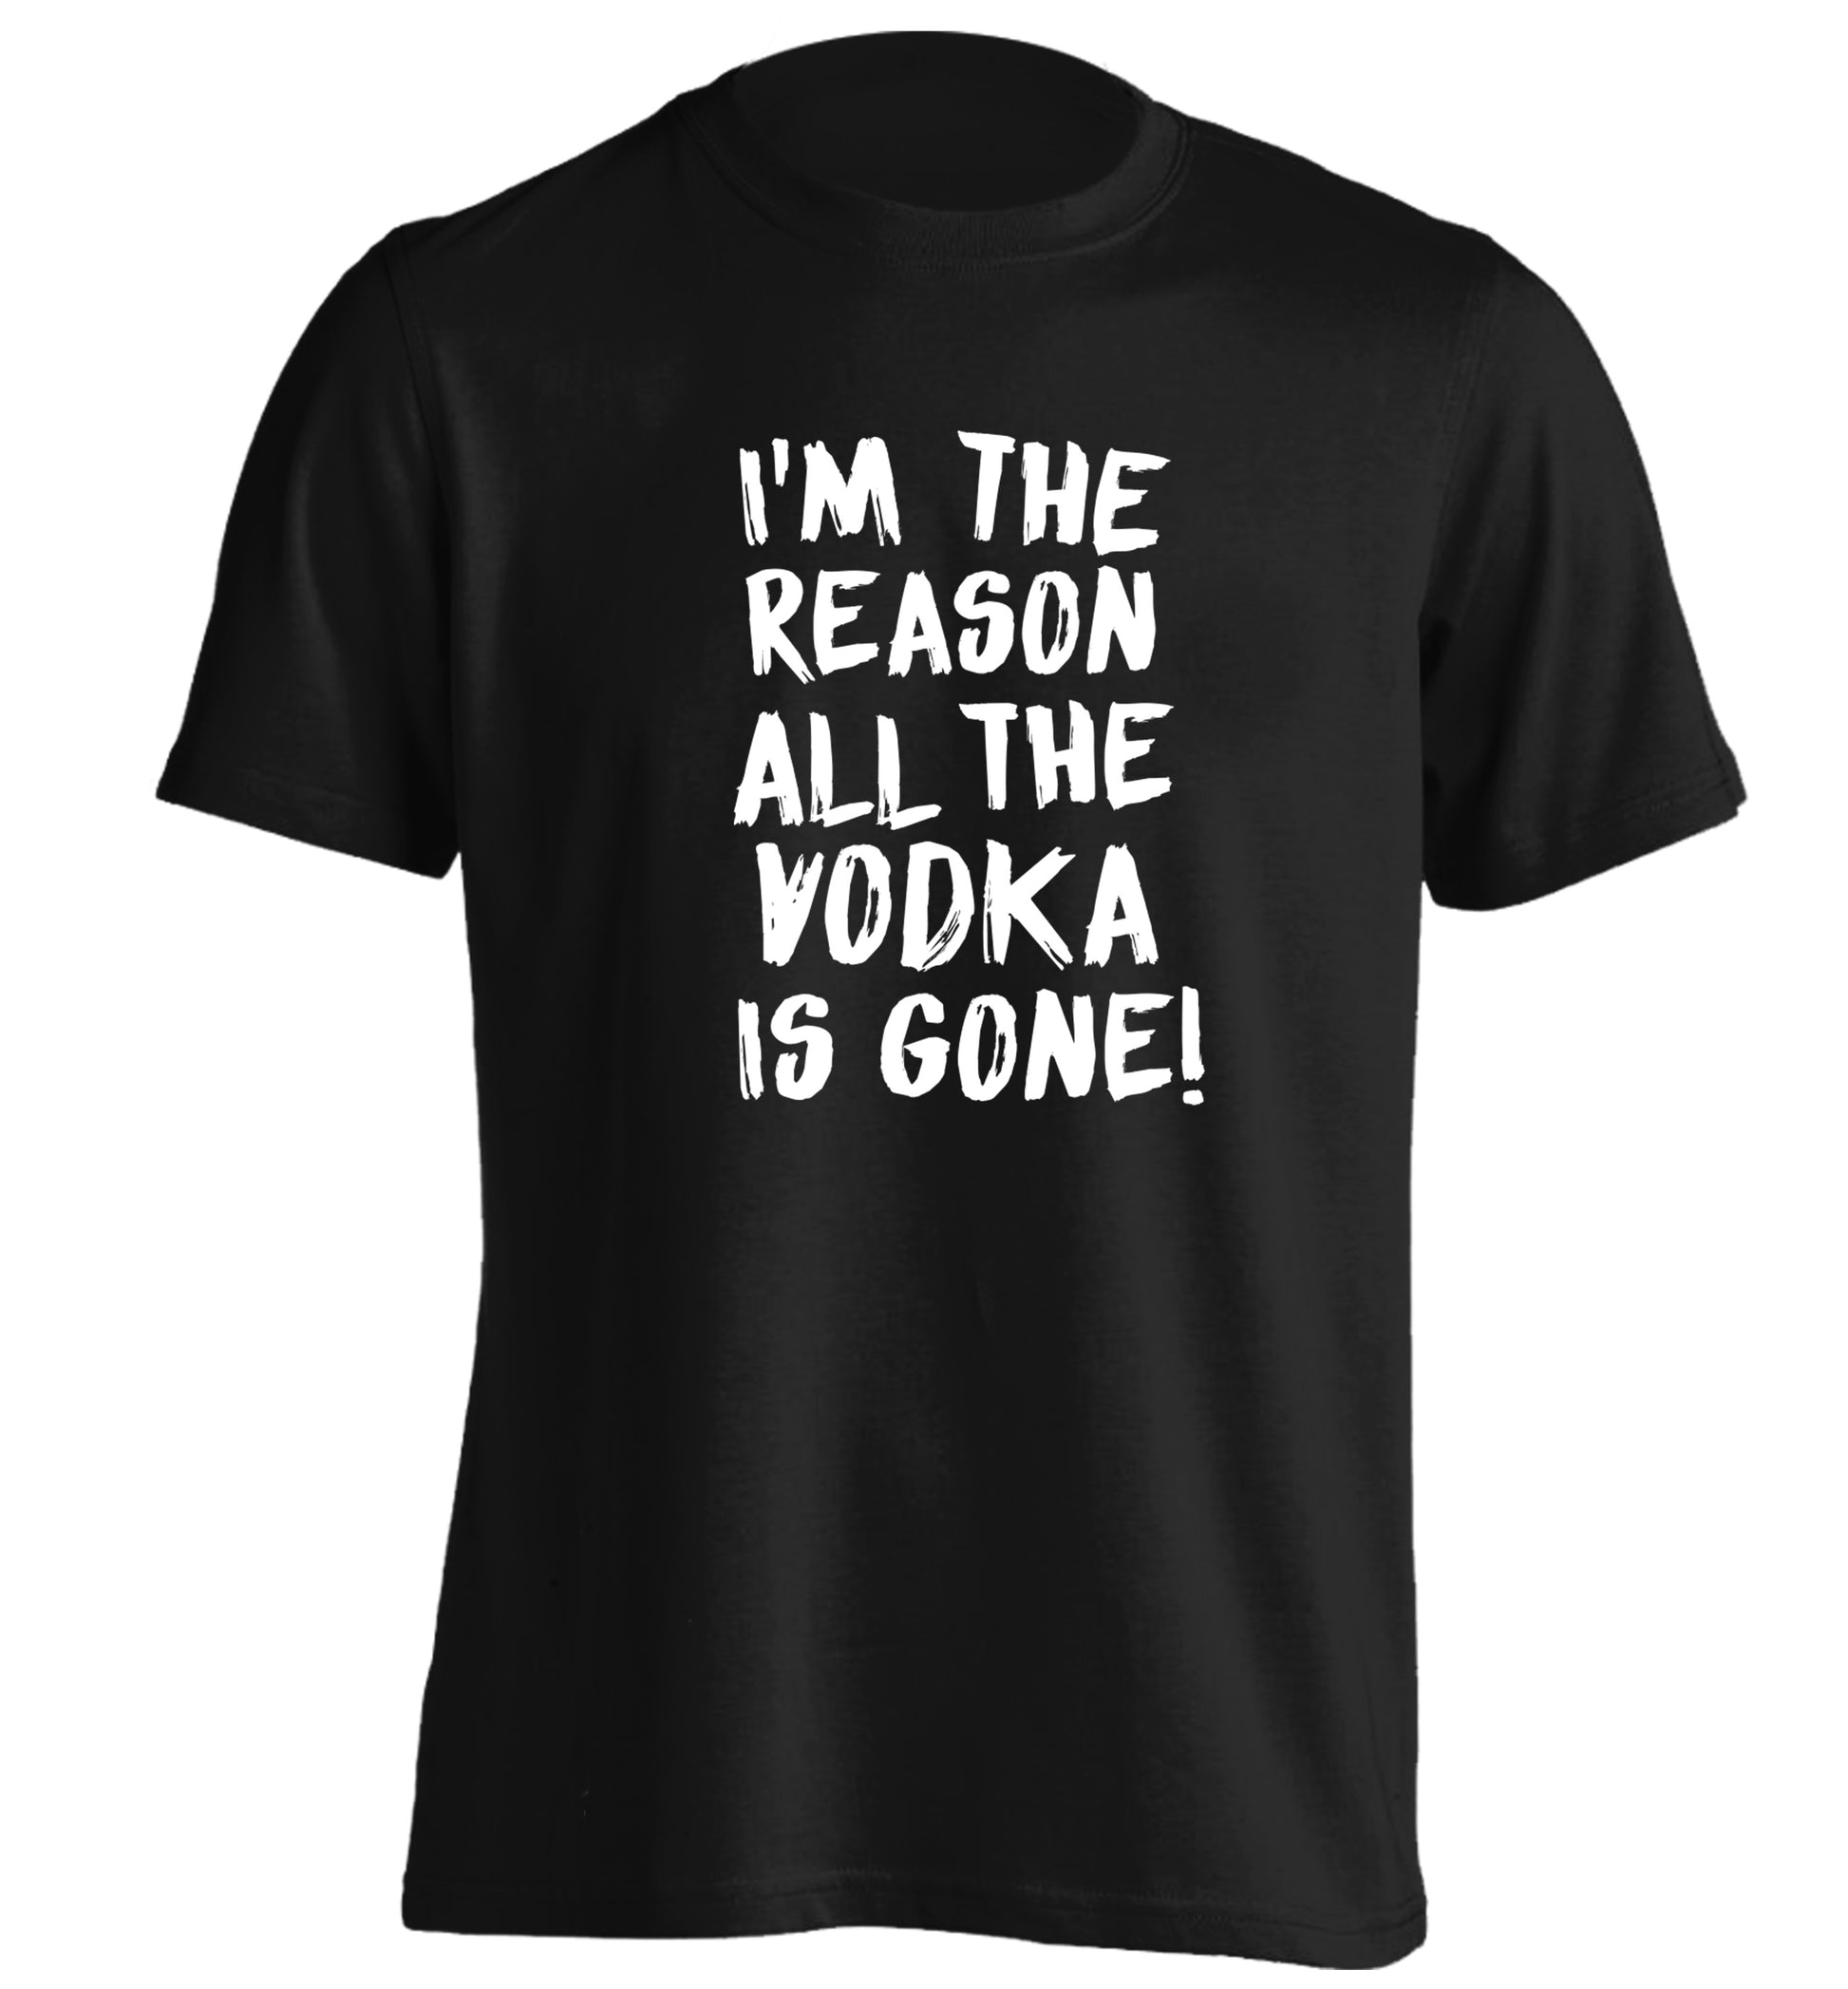 I'm the reason all the tequila is gone adults unisex black Tshirt 2XL